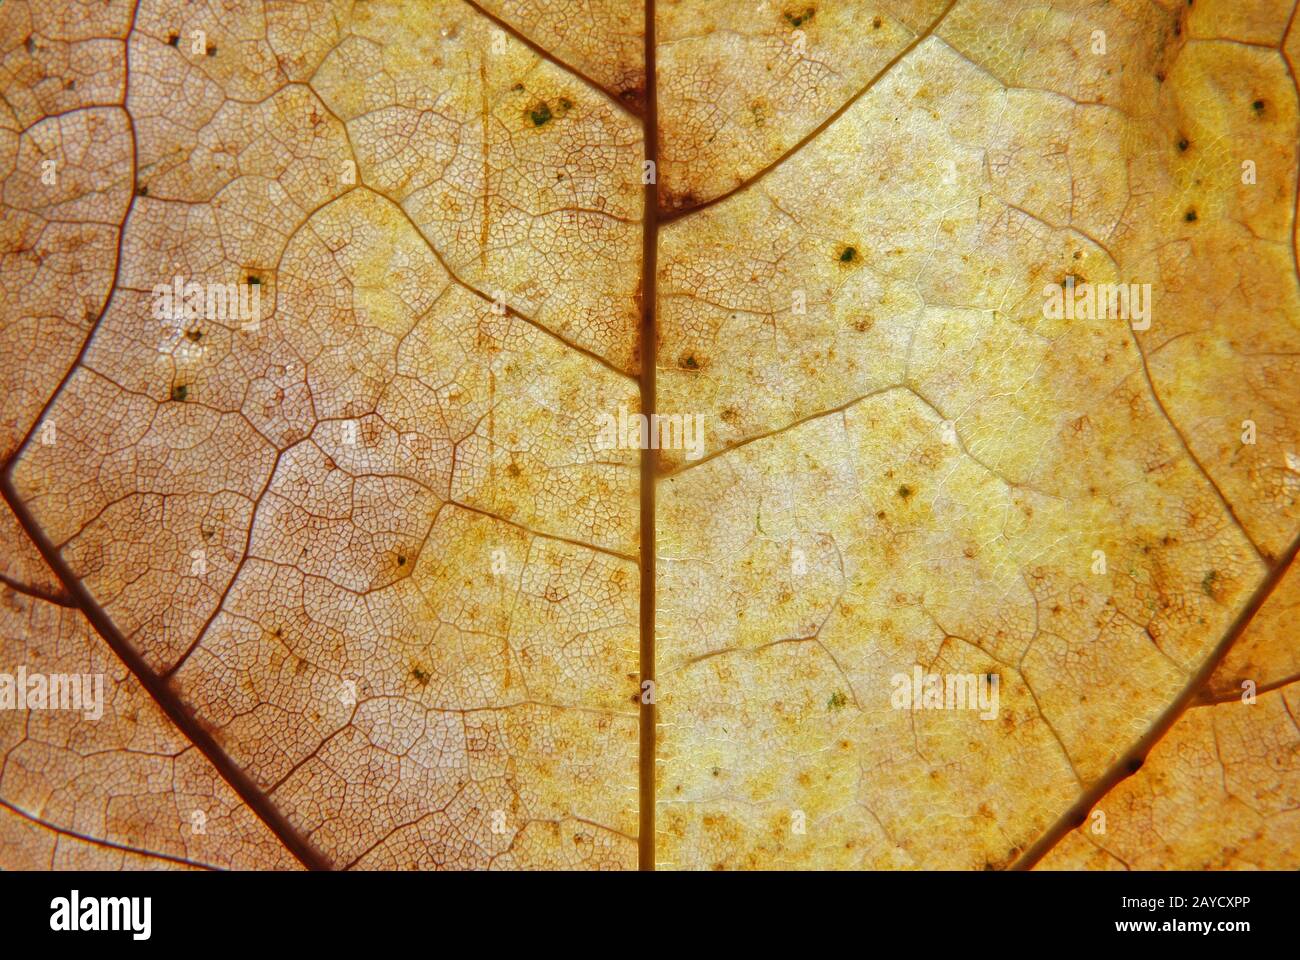 full frame close up of a yellow and brown autumn leaf with veins and cells show in detail Stock Photo